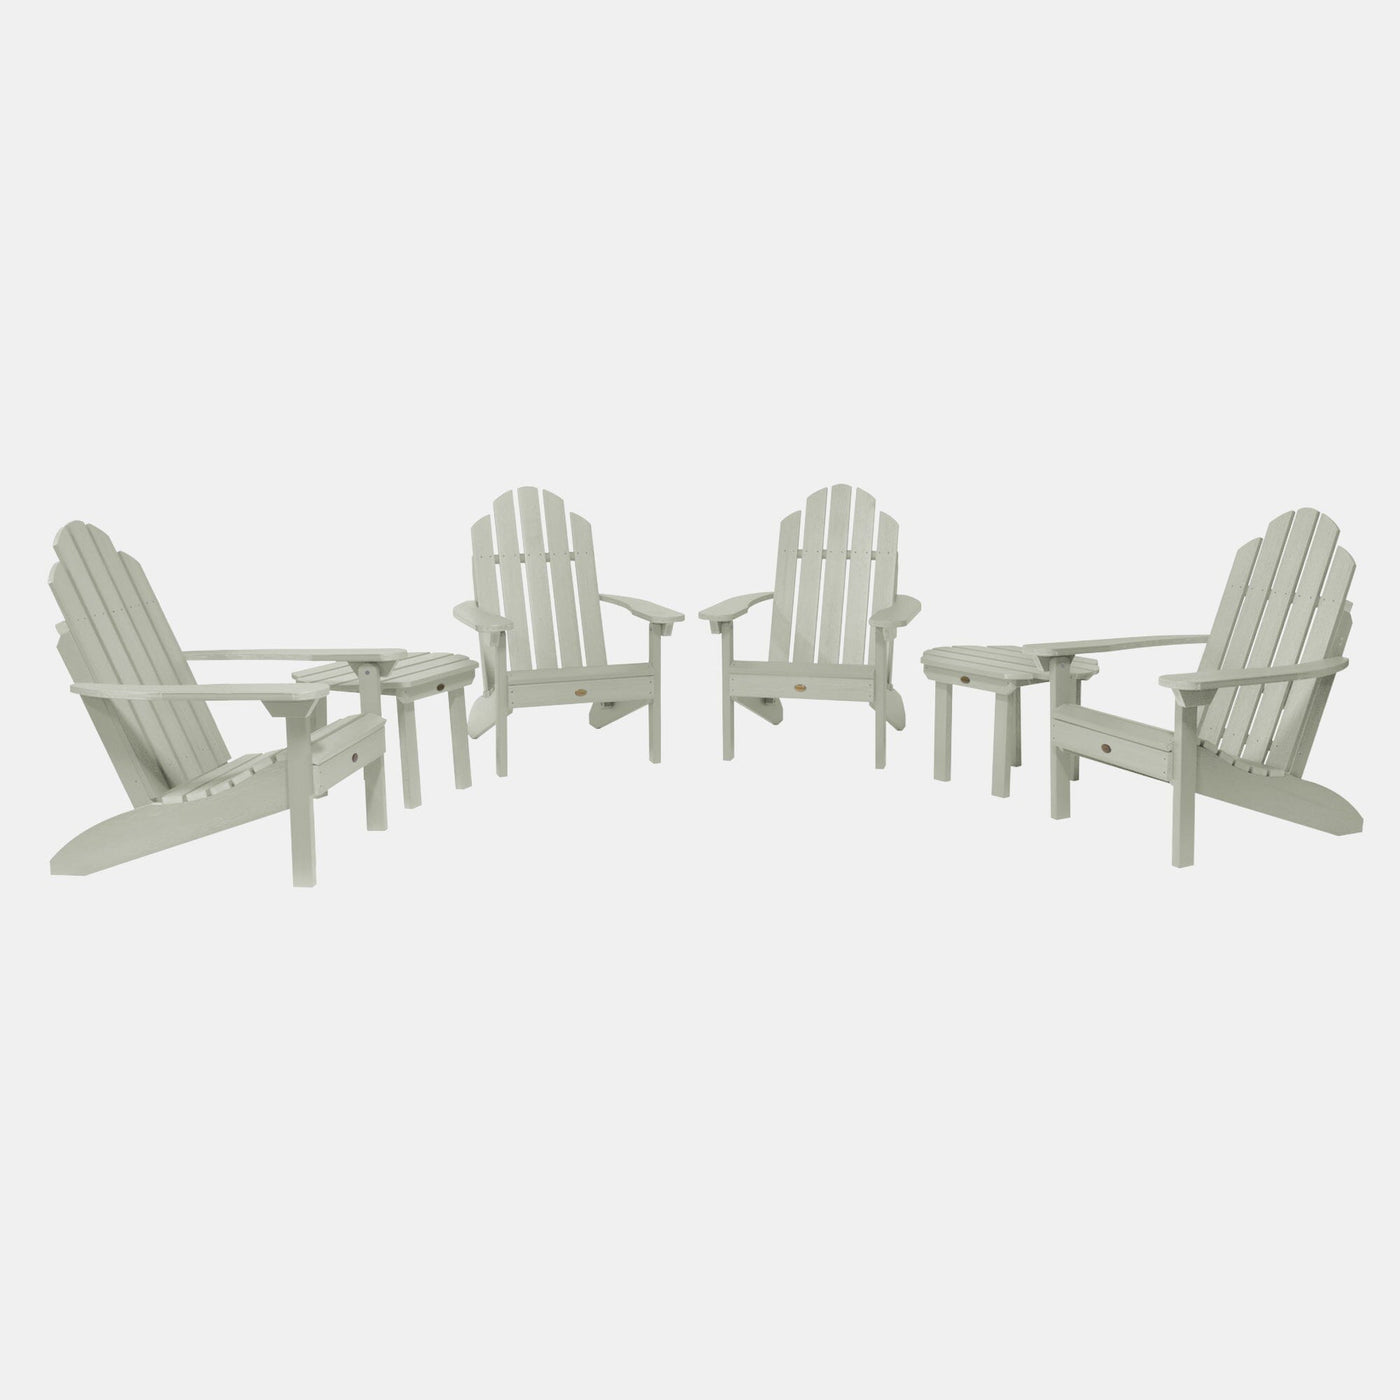 4 Classic Westport Adirondack Chairs with 2 Side Tables Kitted Sets Highwood USA Eucalyptus 